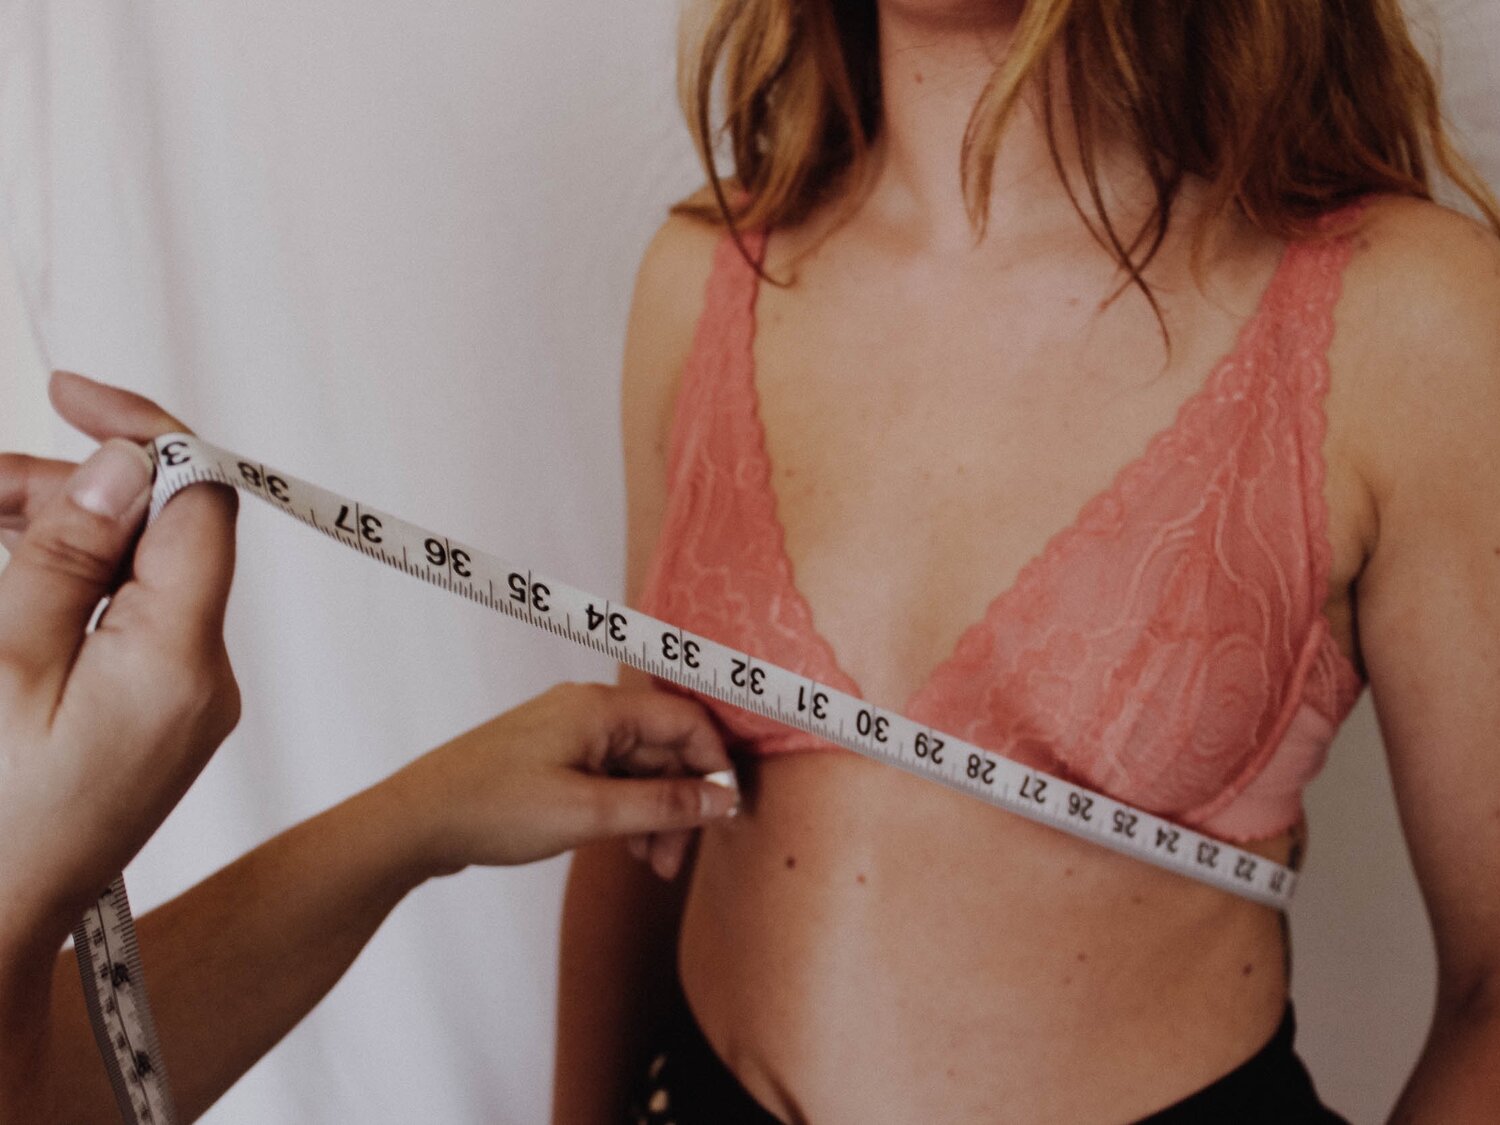 Bra fit problems and solutions  Bra fitting, Proper bra fitting